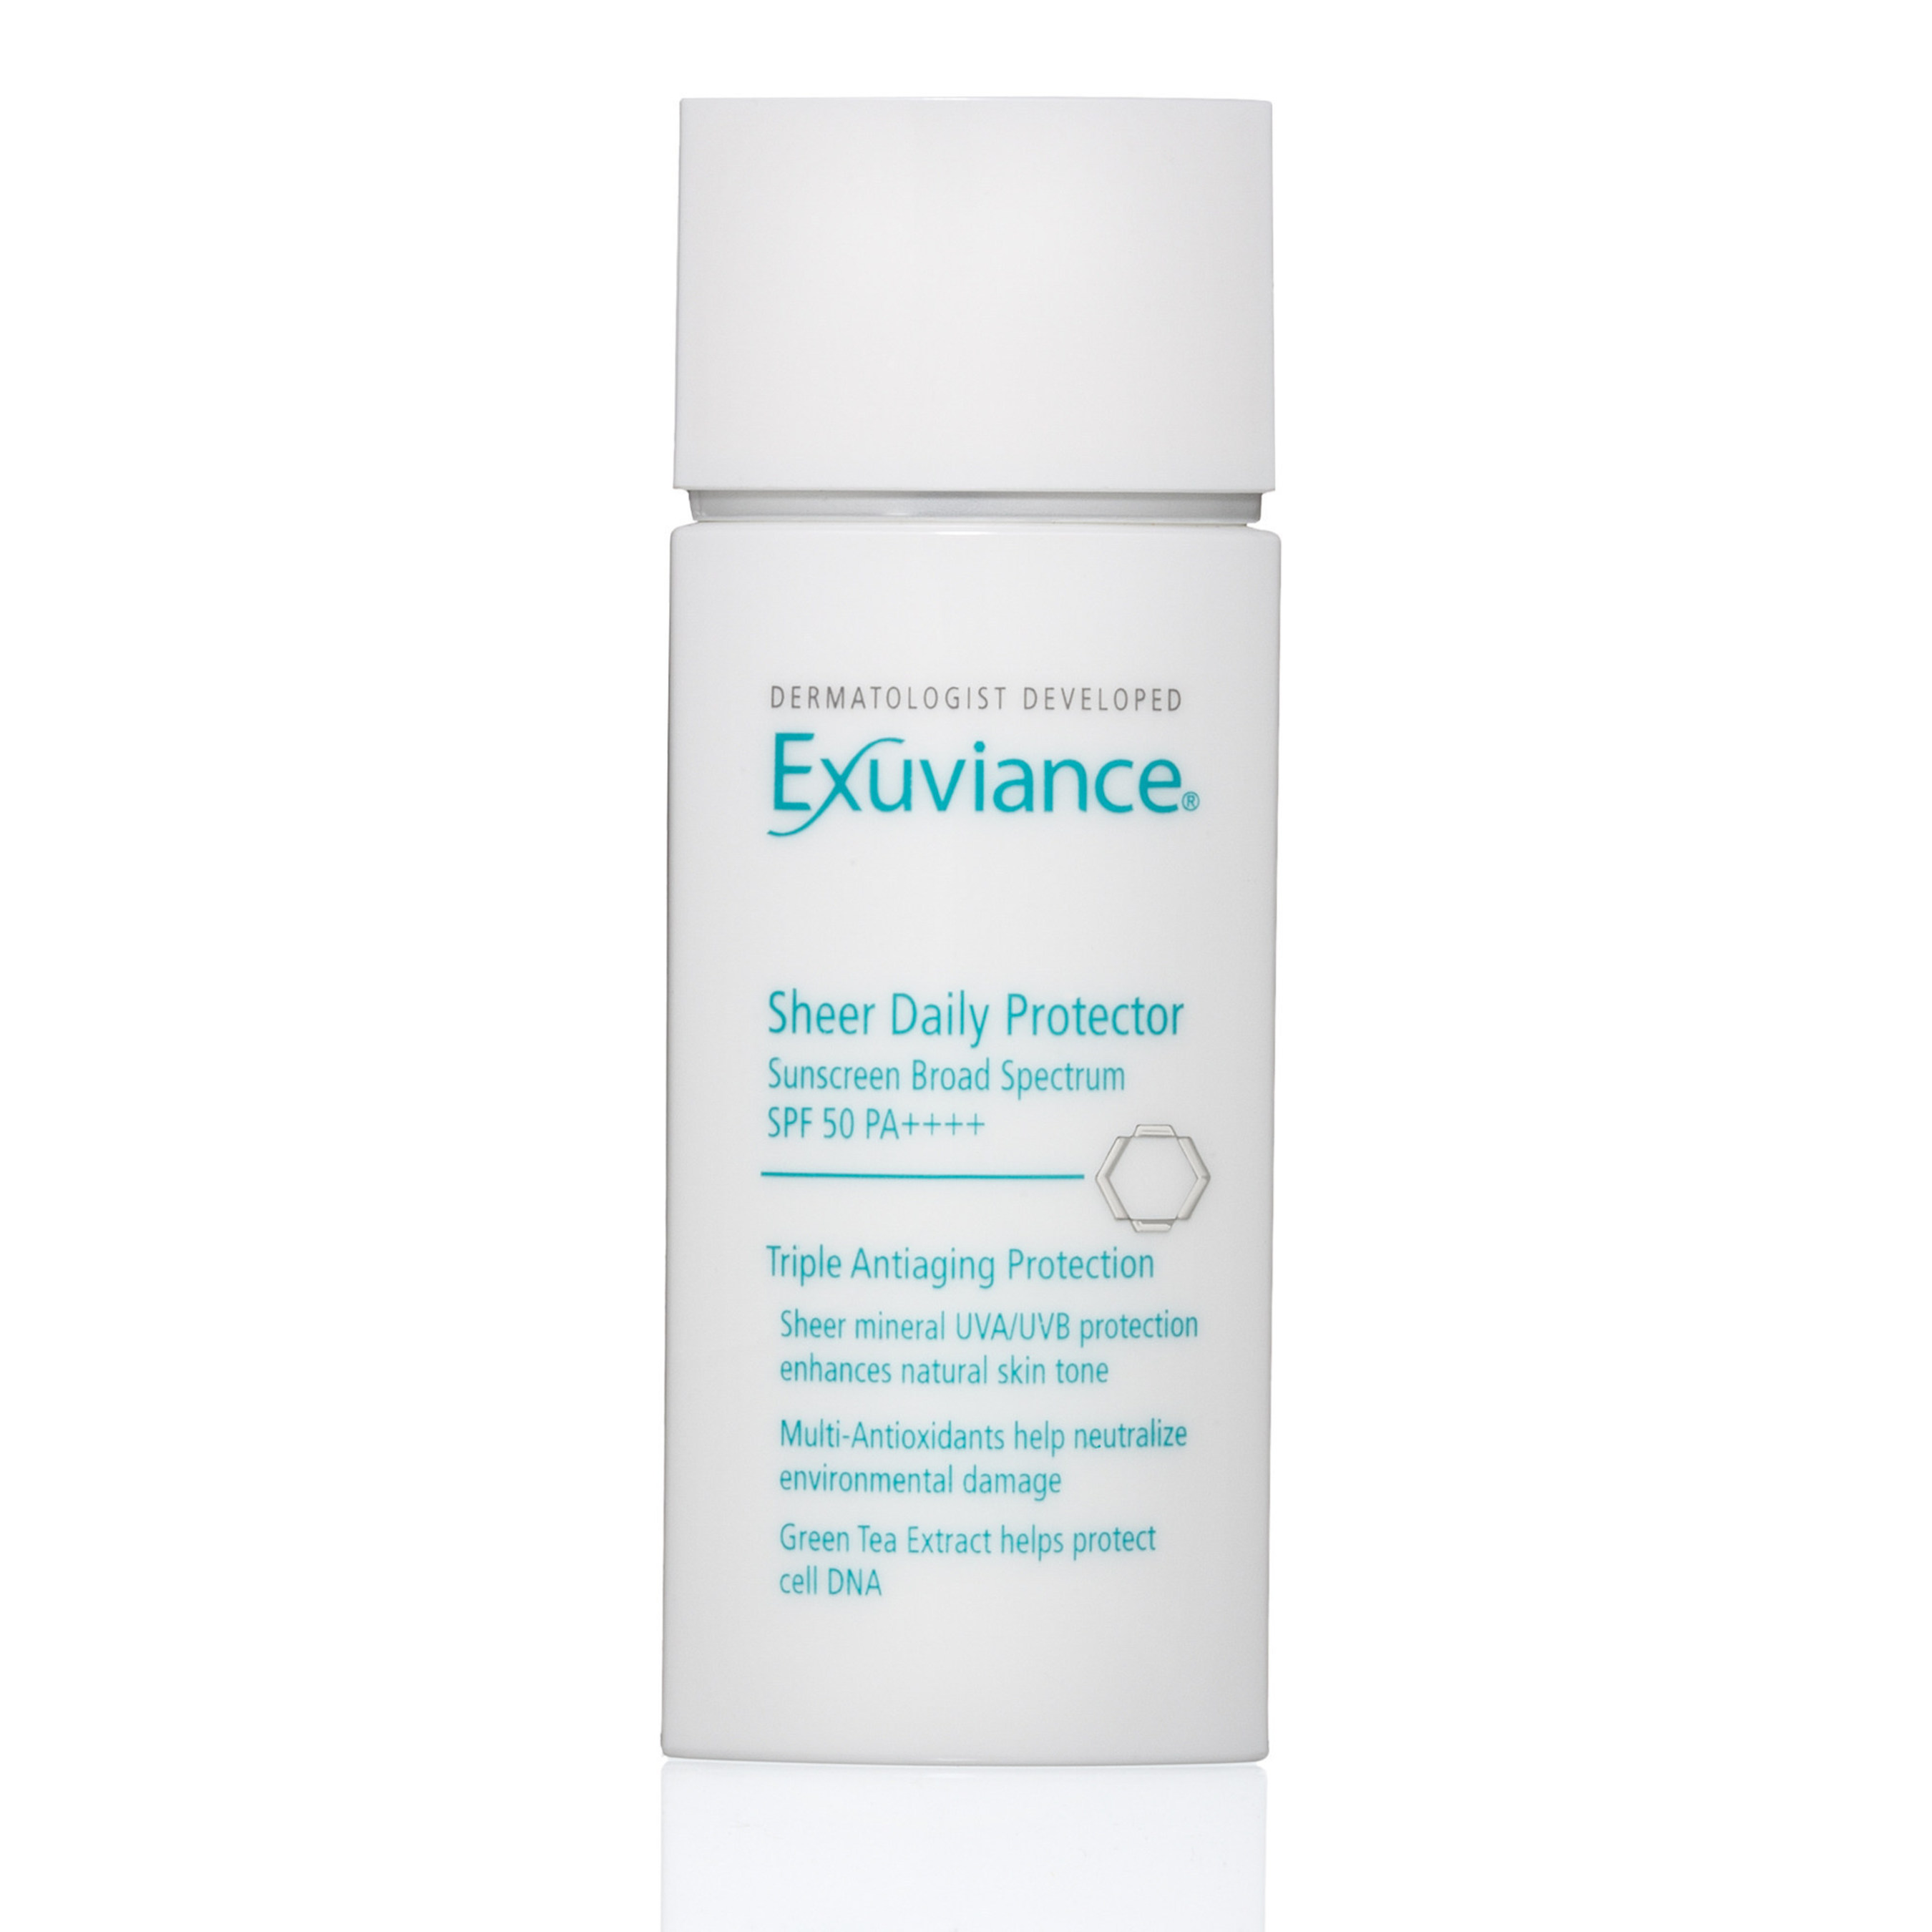 Exuviance Sheer Daily Protector SPF 50